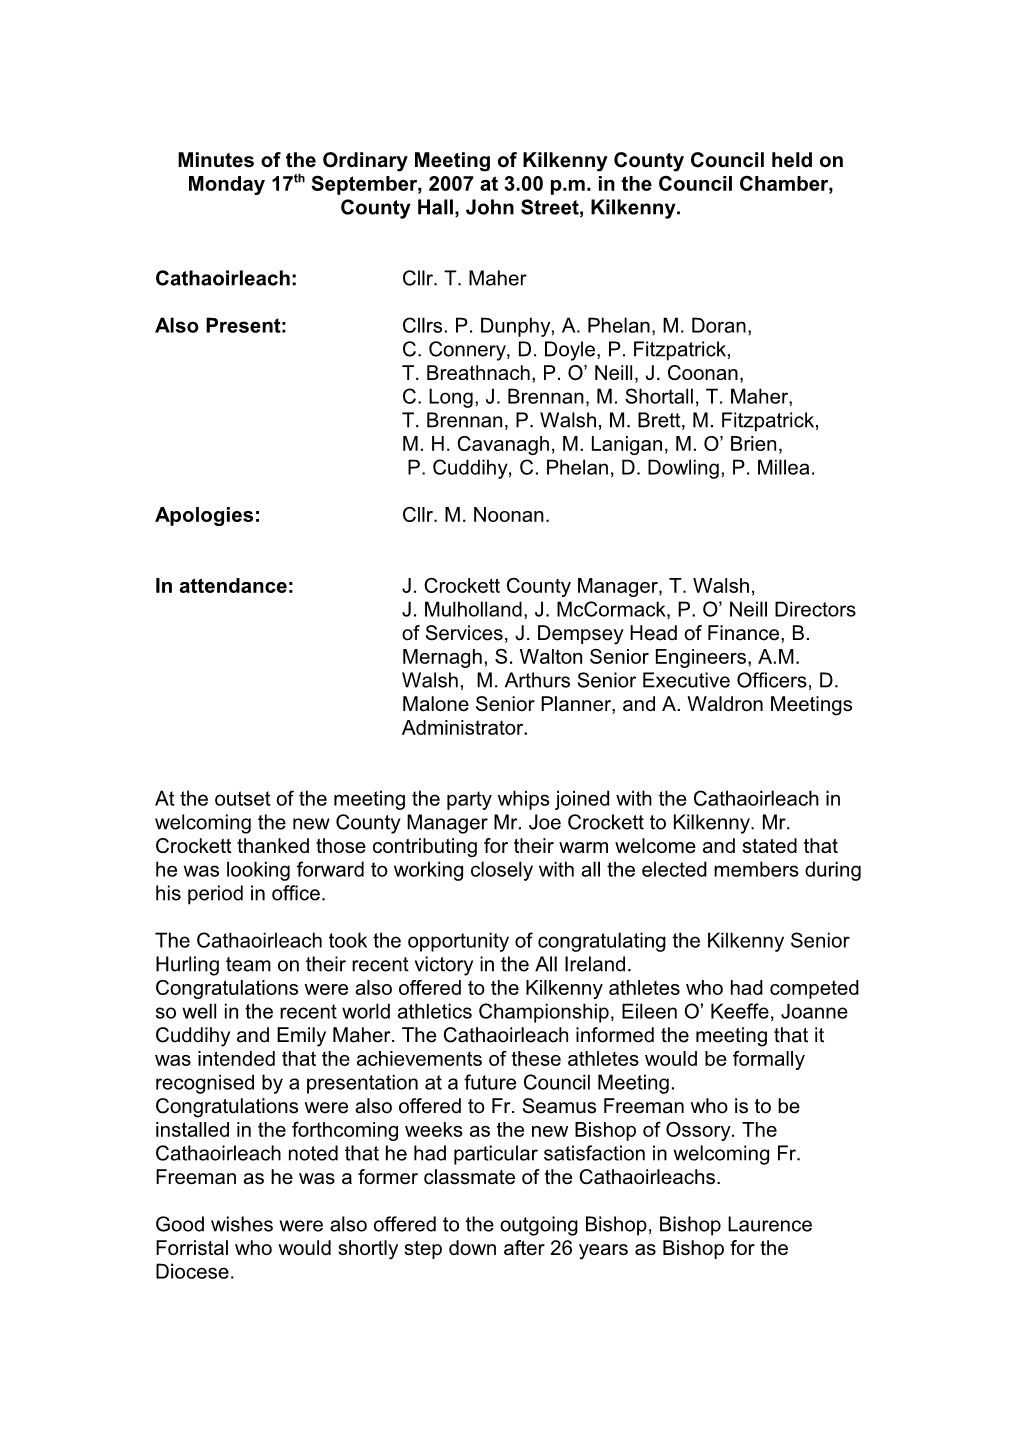 Minutes of the Ordinary Meeting of Kilkenny County Council Held on Monday 16Th July, 2007 at 3